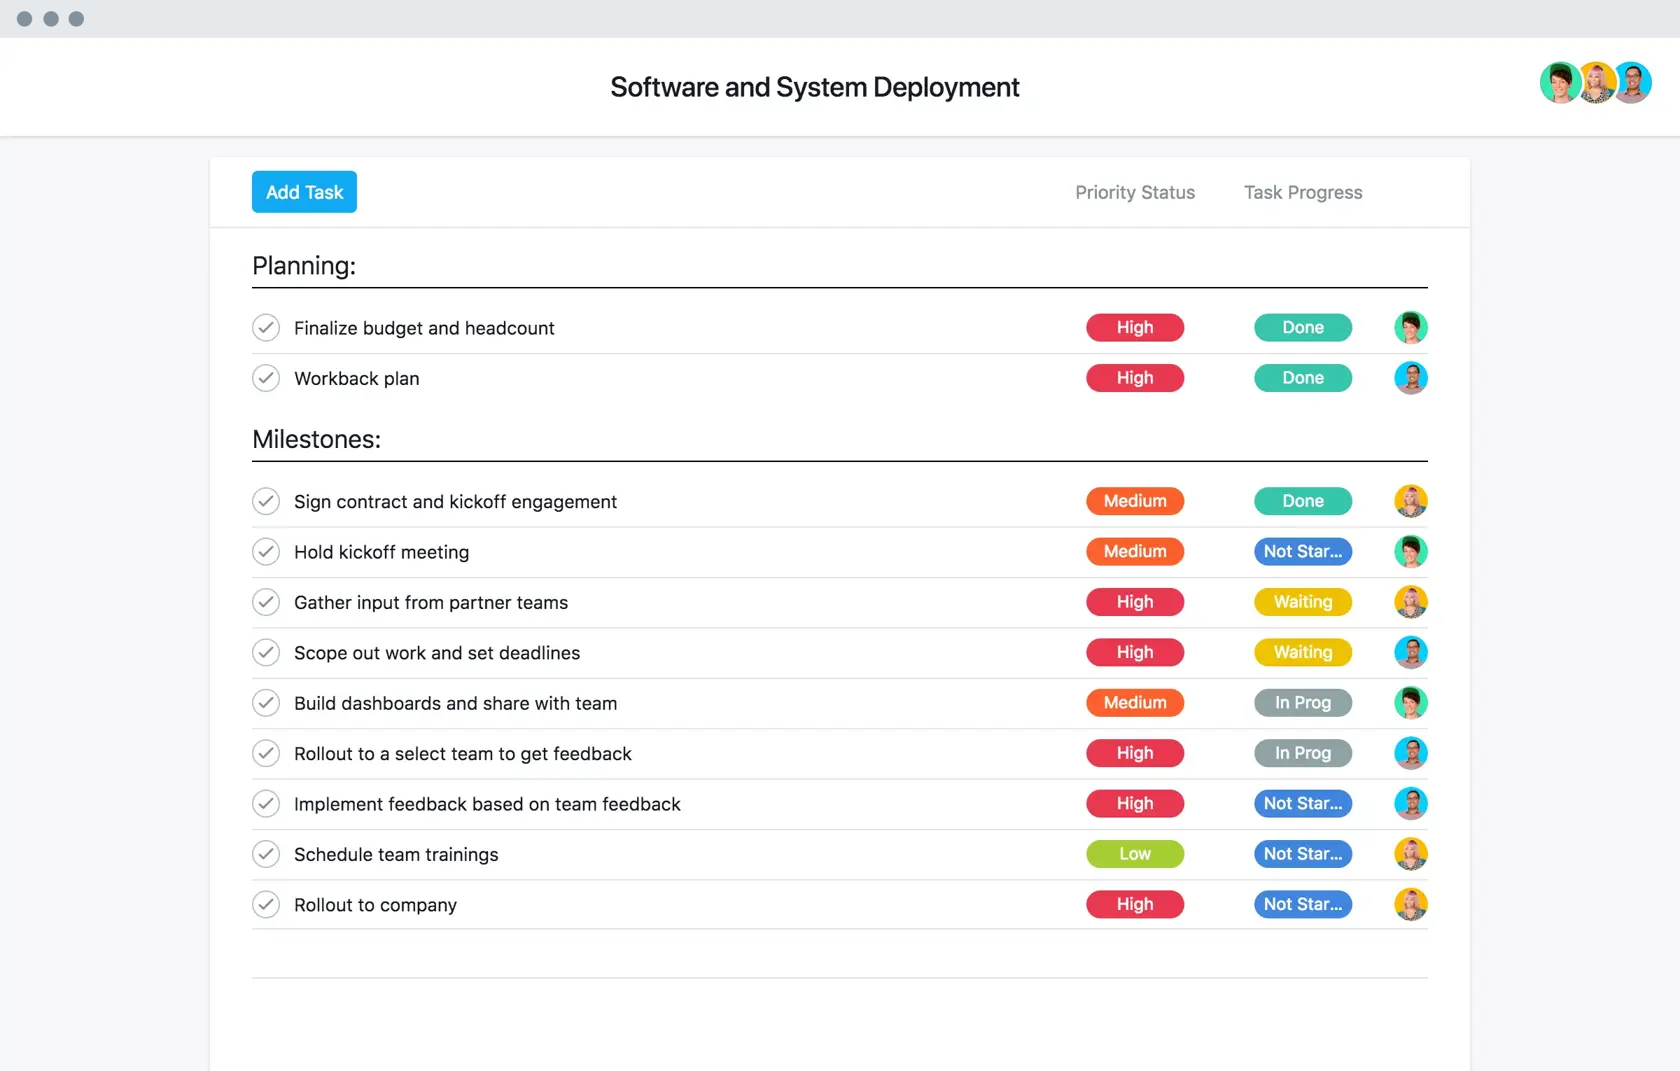 [old product ui] Software and systems deployment project in Asana, spreadsheet-style project view (List)